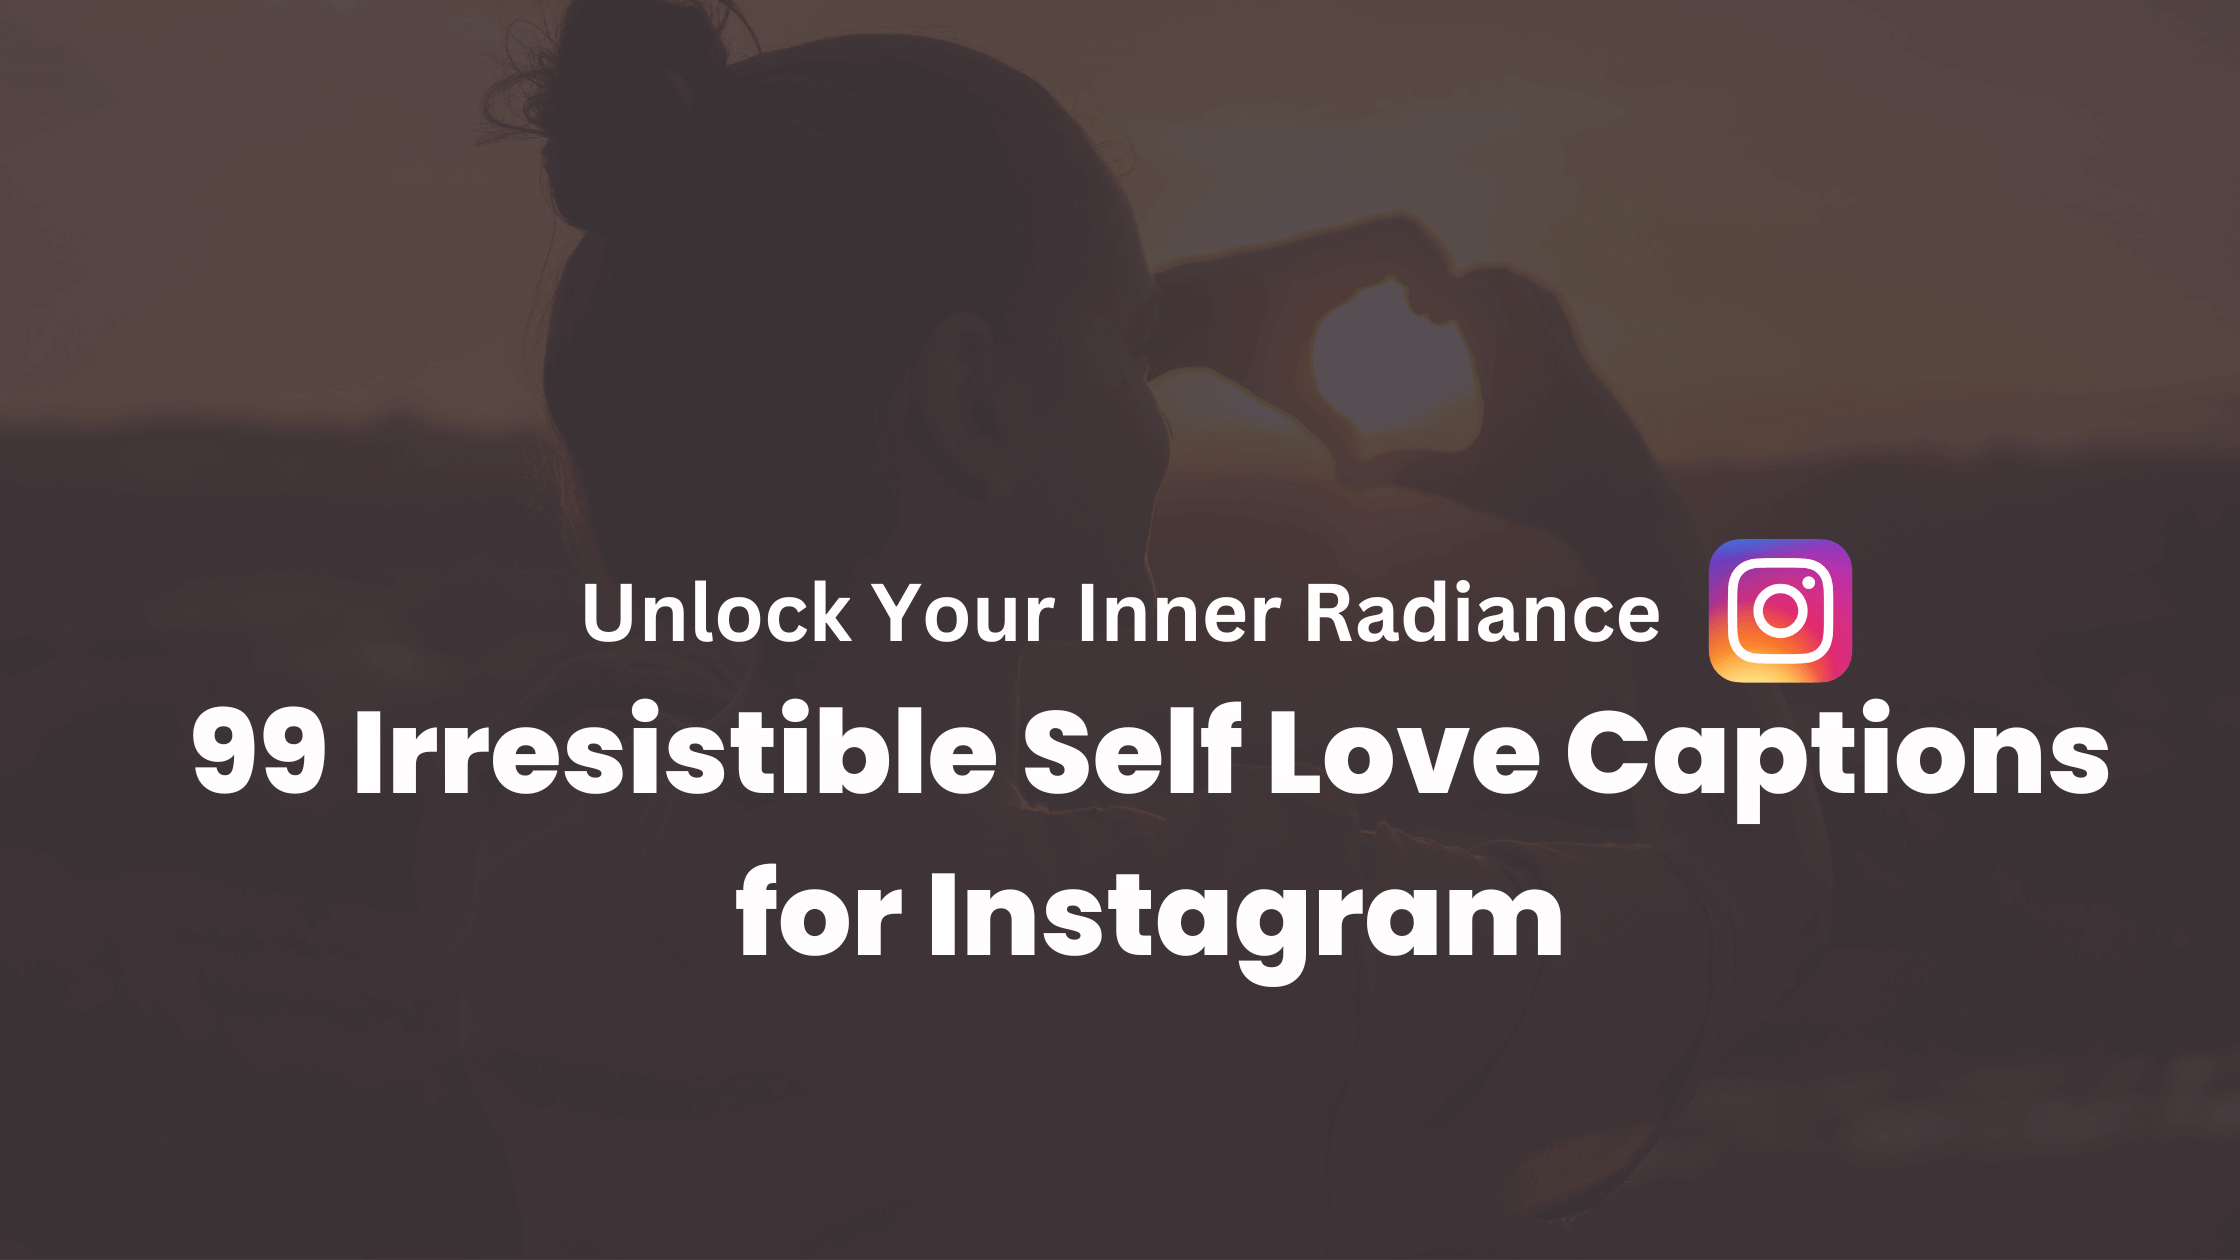 99 Irresistible Self Love Captions for Instagram